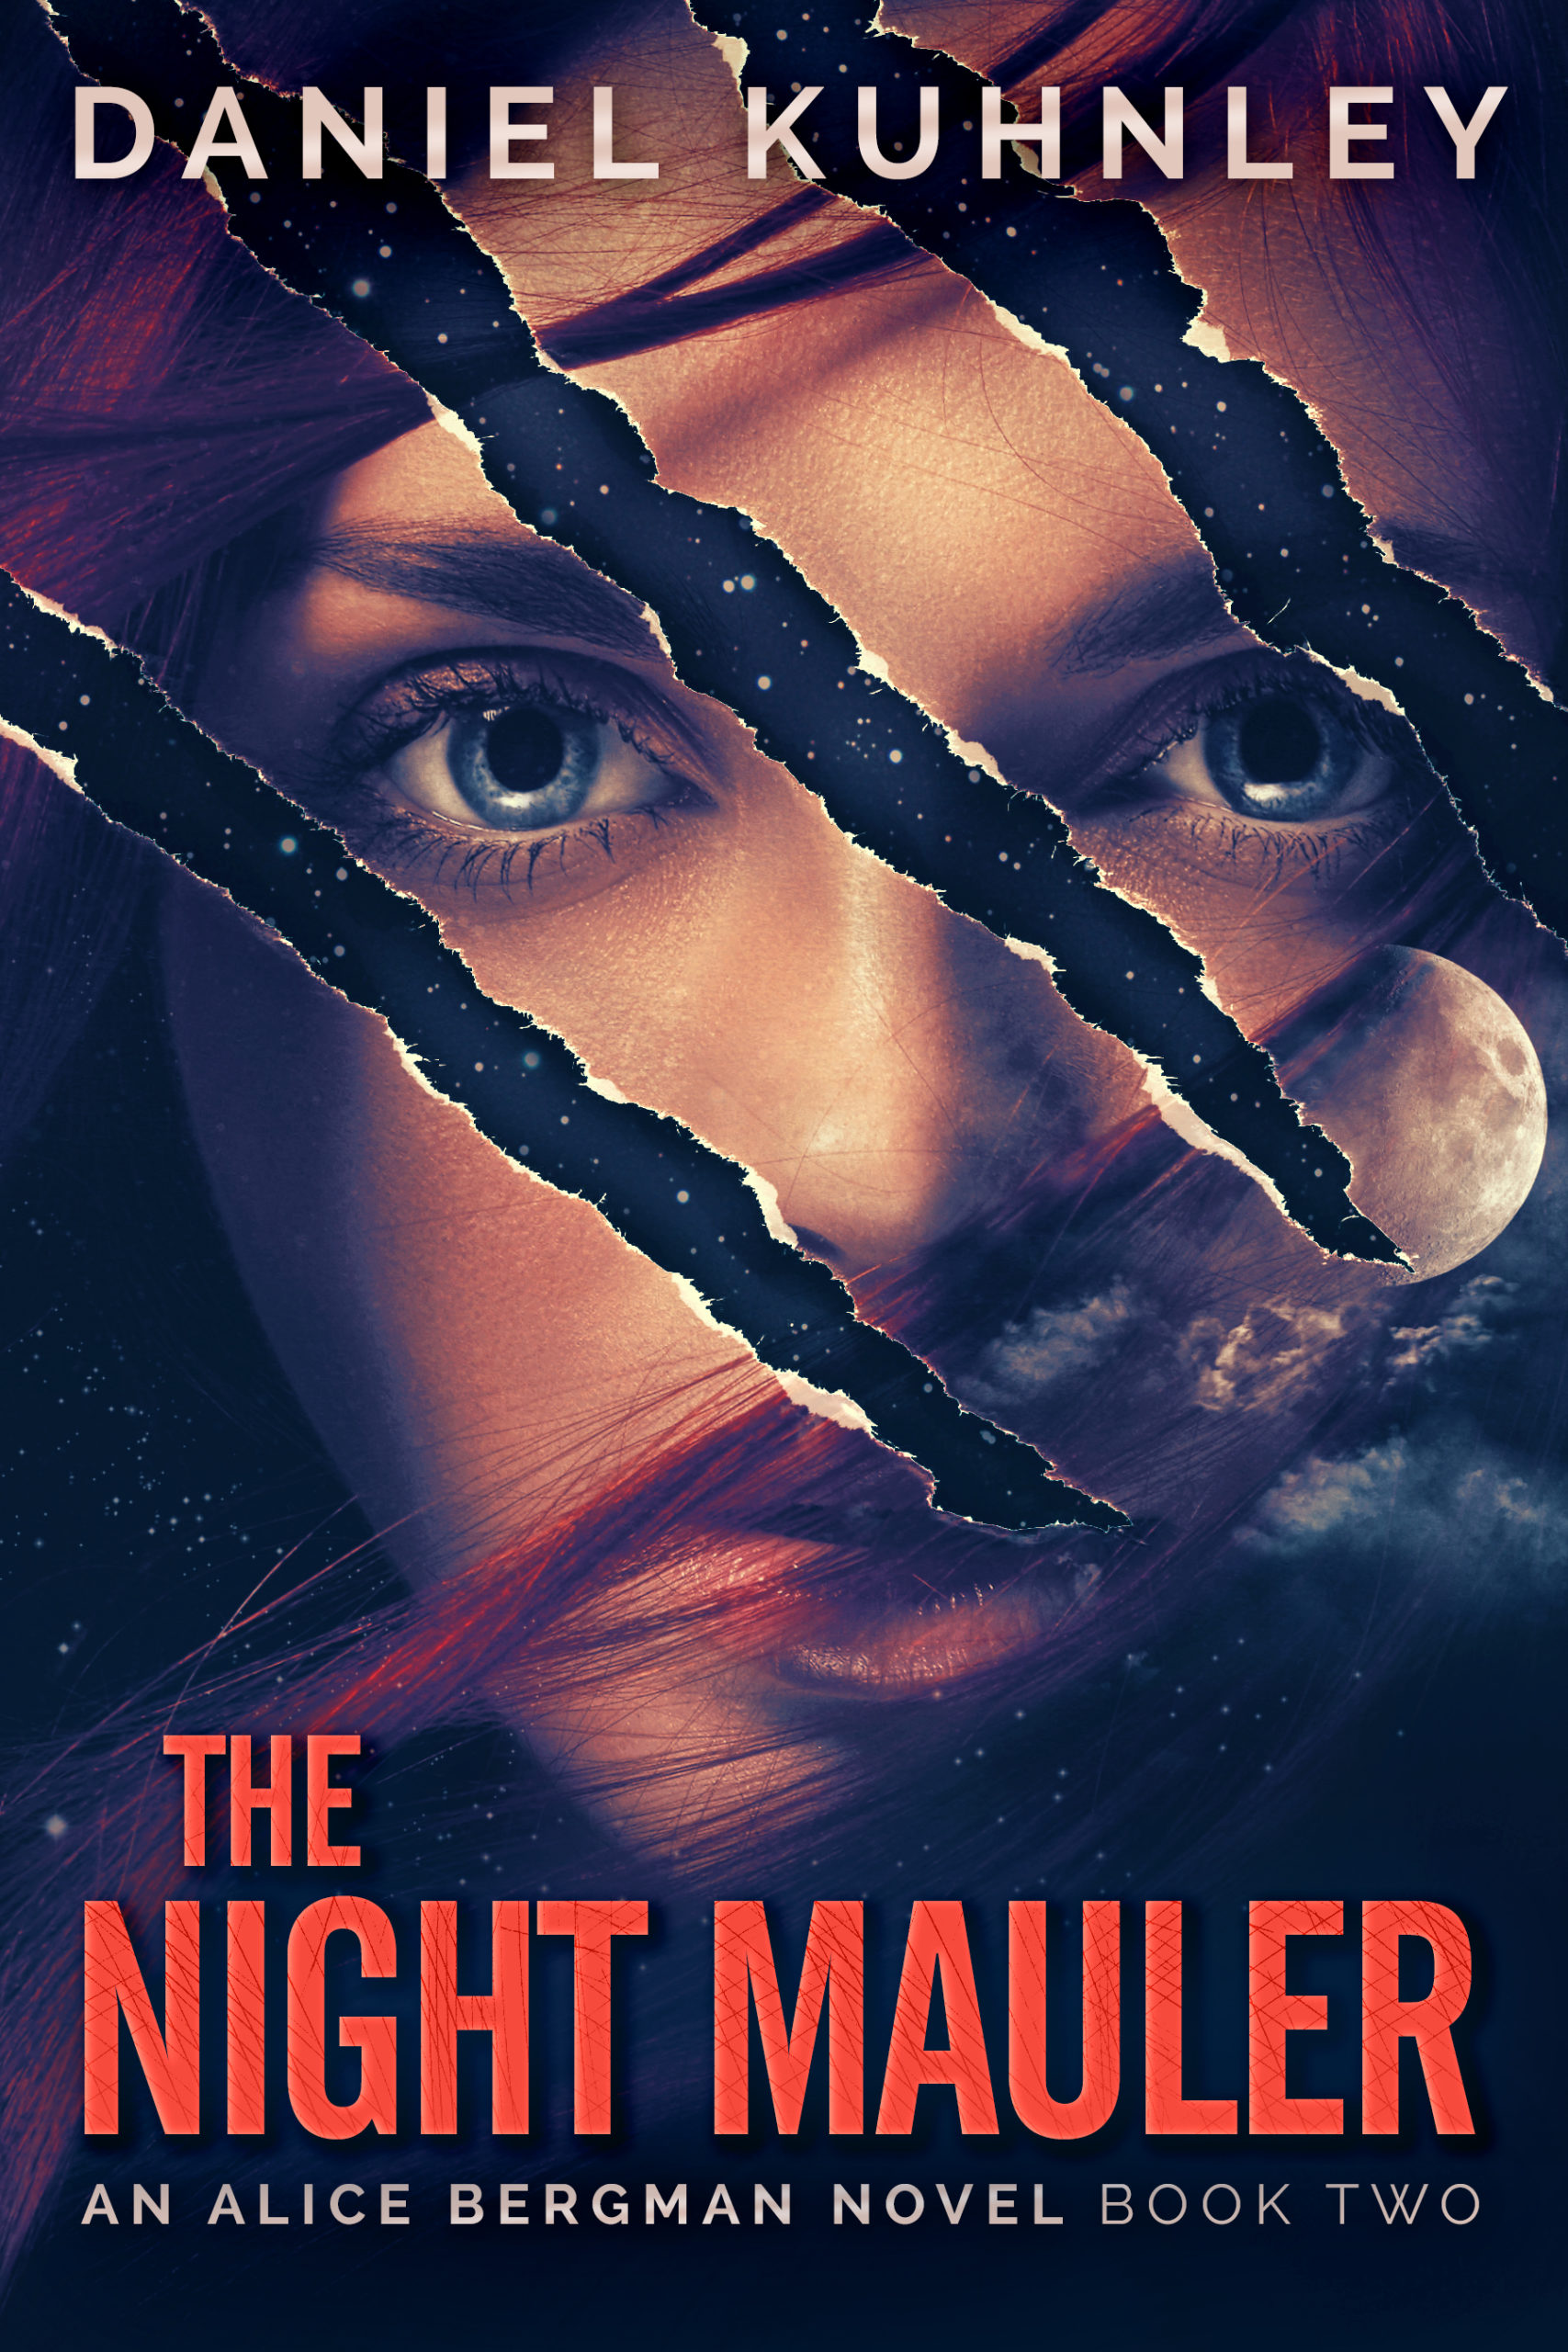 Book cover art for Daniel Kuhnley's supernatural serial killer novel The Night Mauler - features an image of a woman with red hair with claw marks through her face